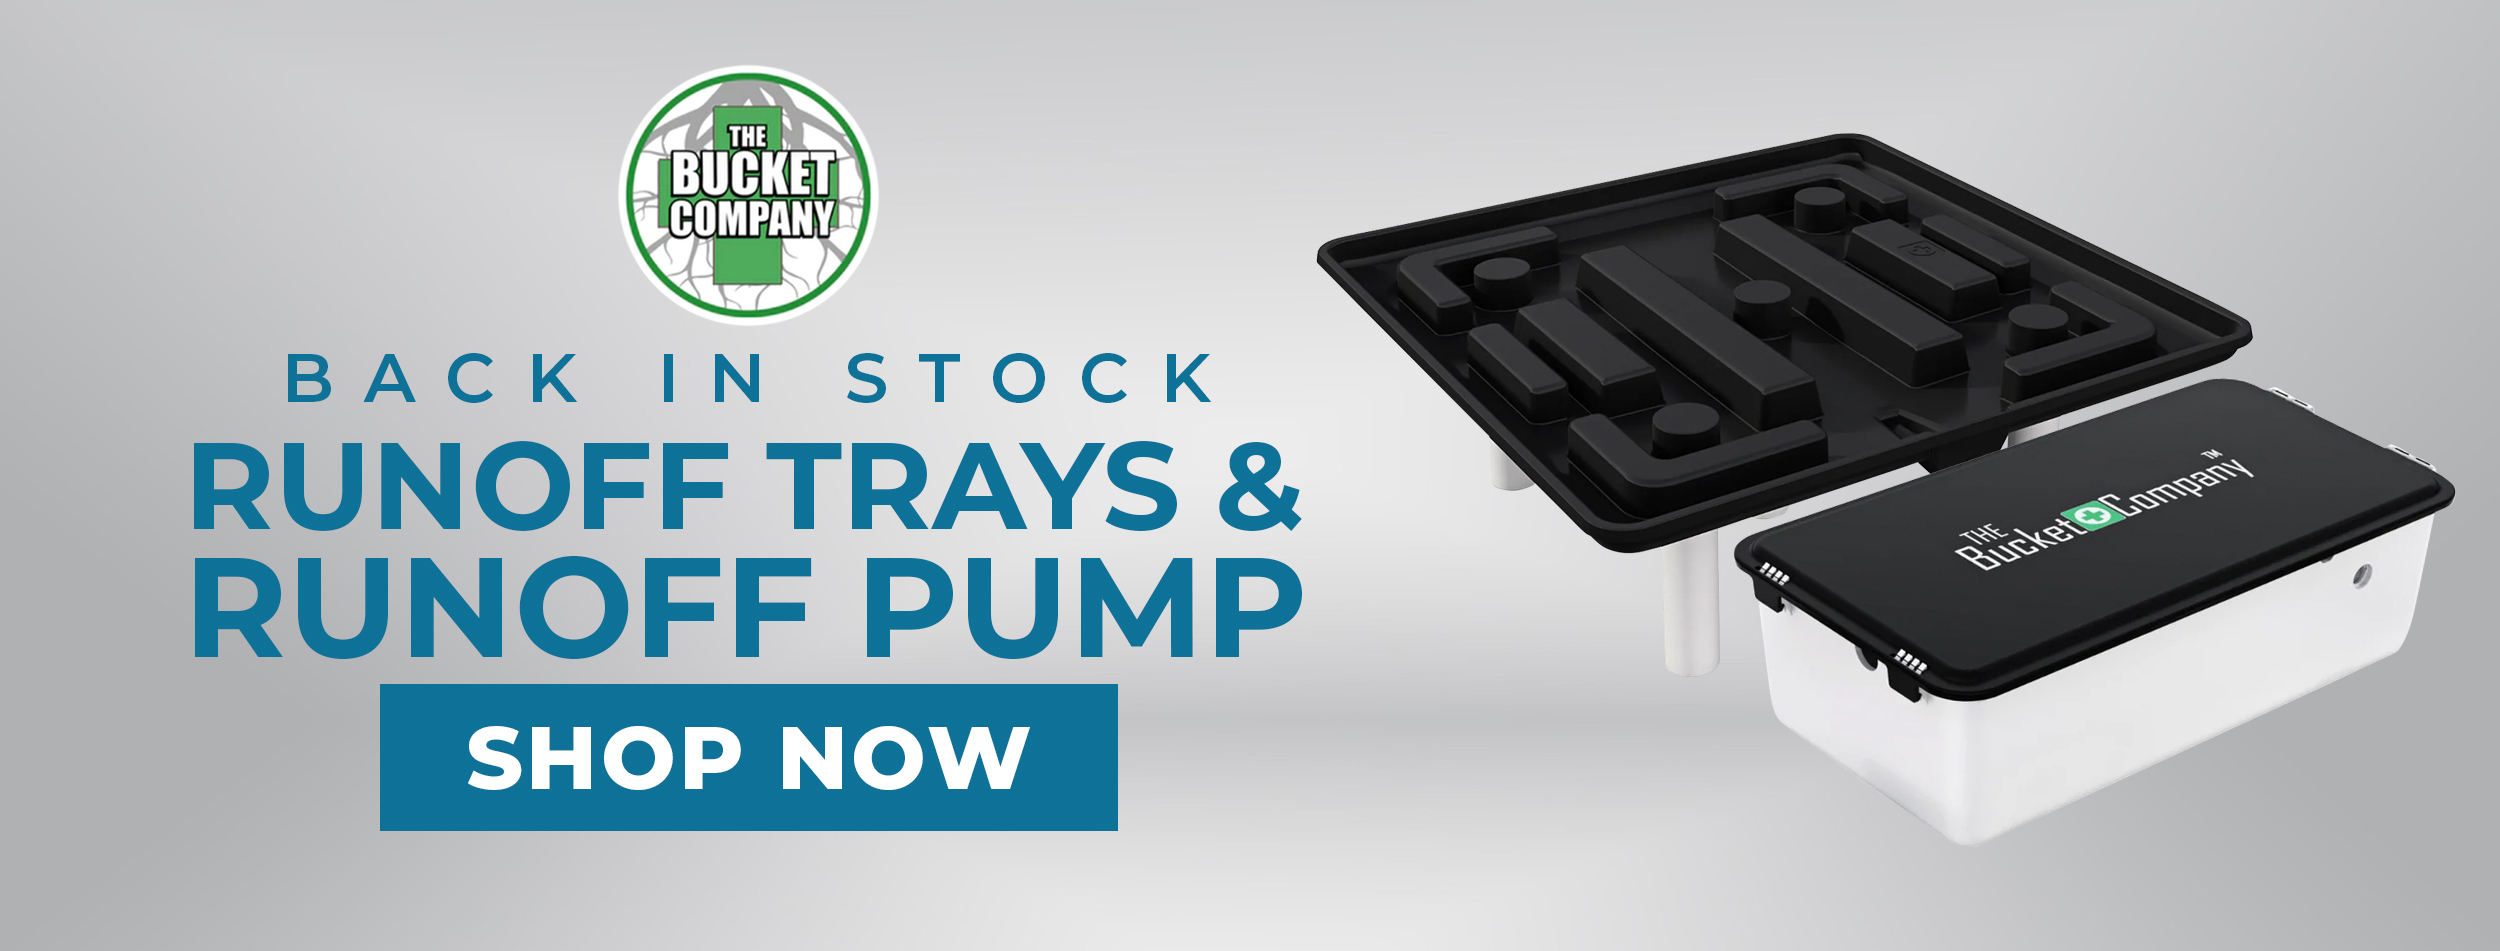 Runoff Trays & Pump - Back in Stock